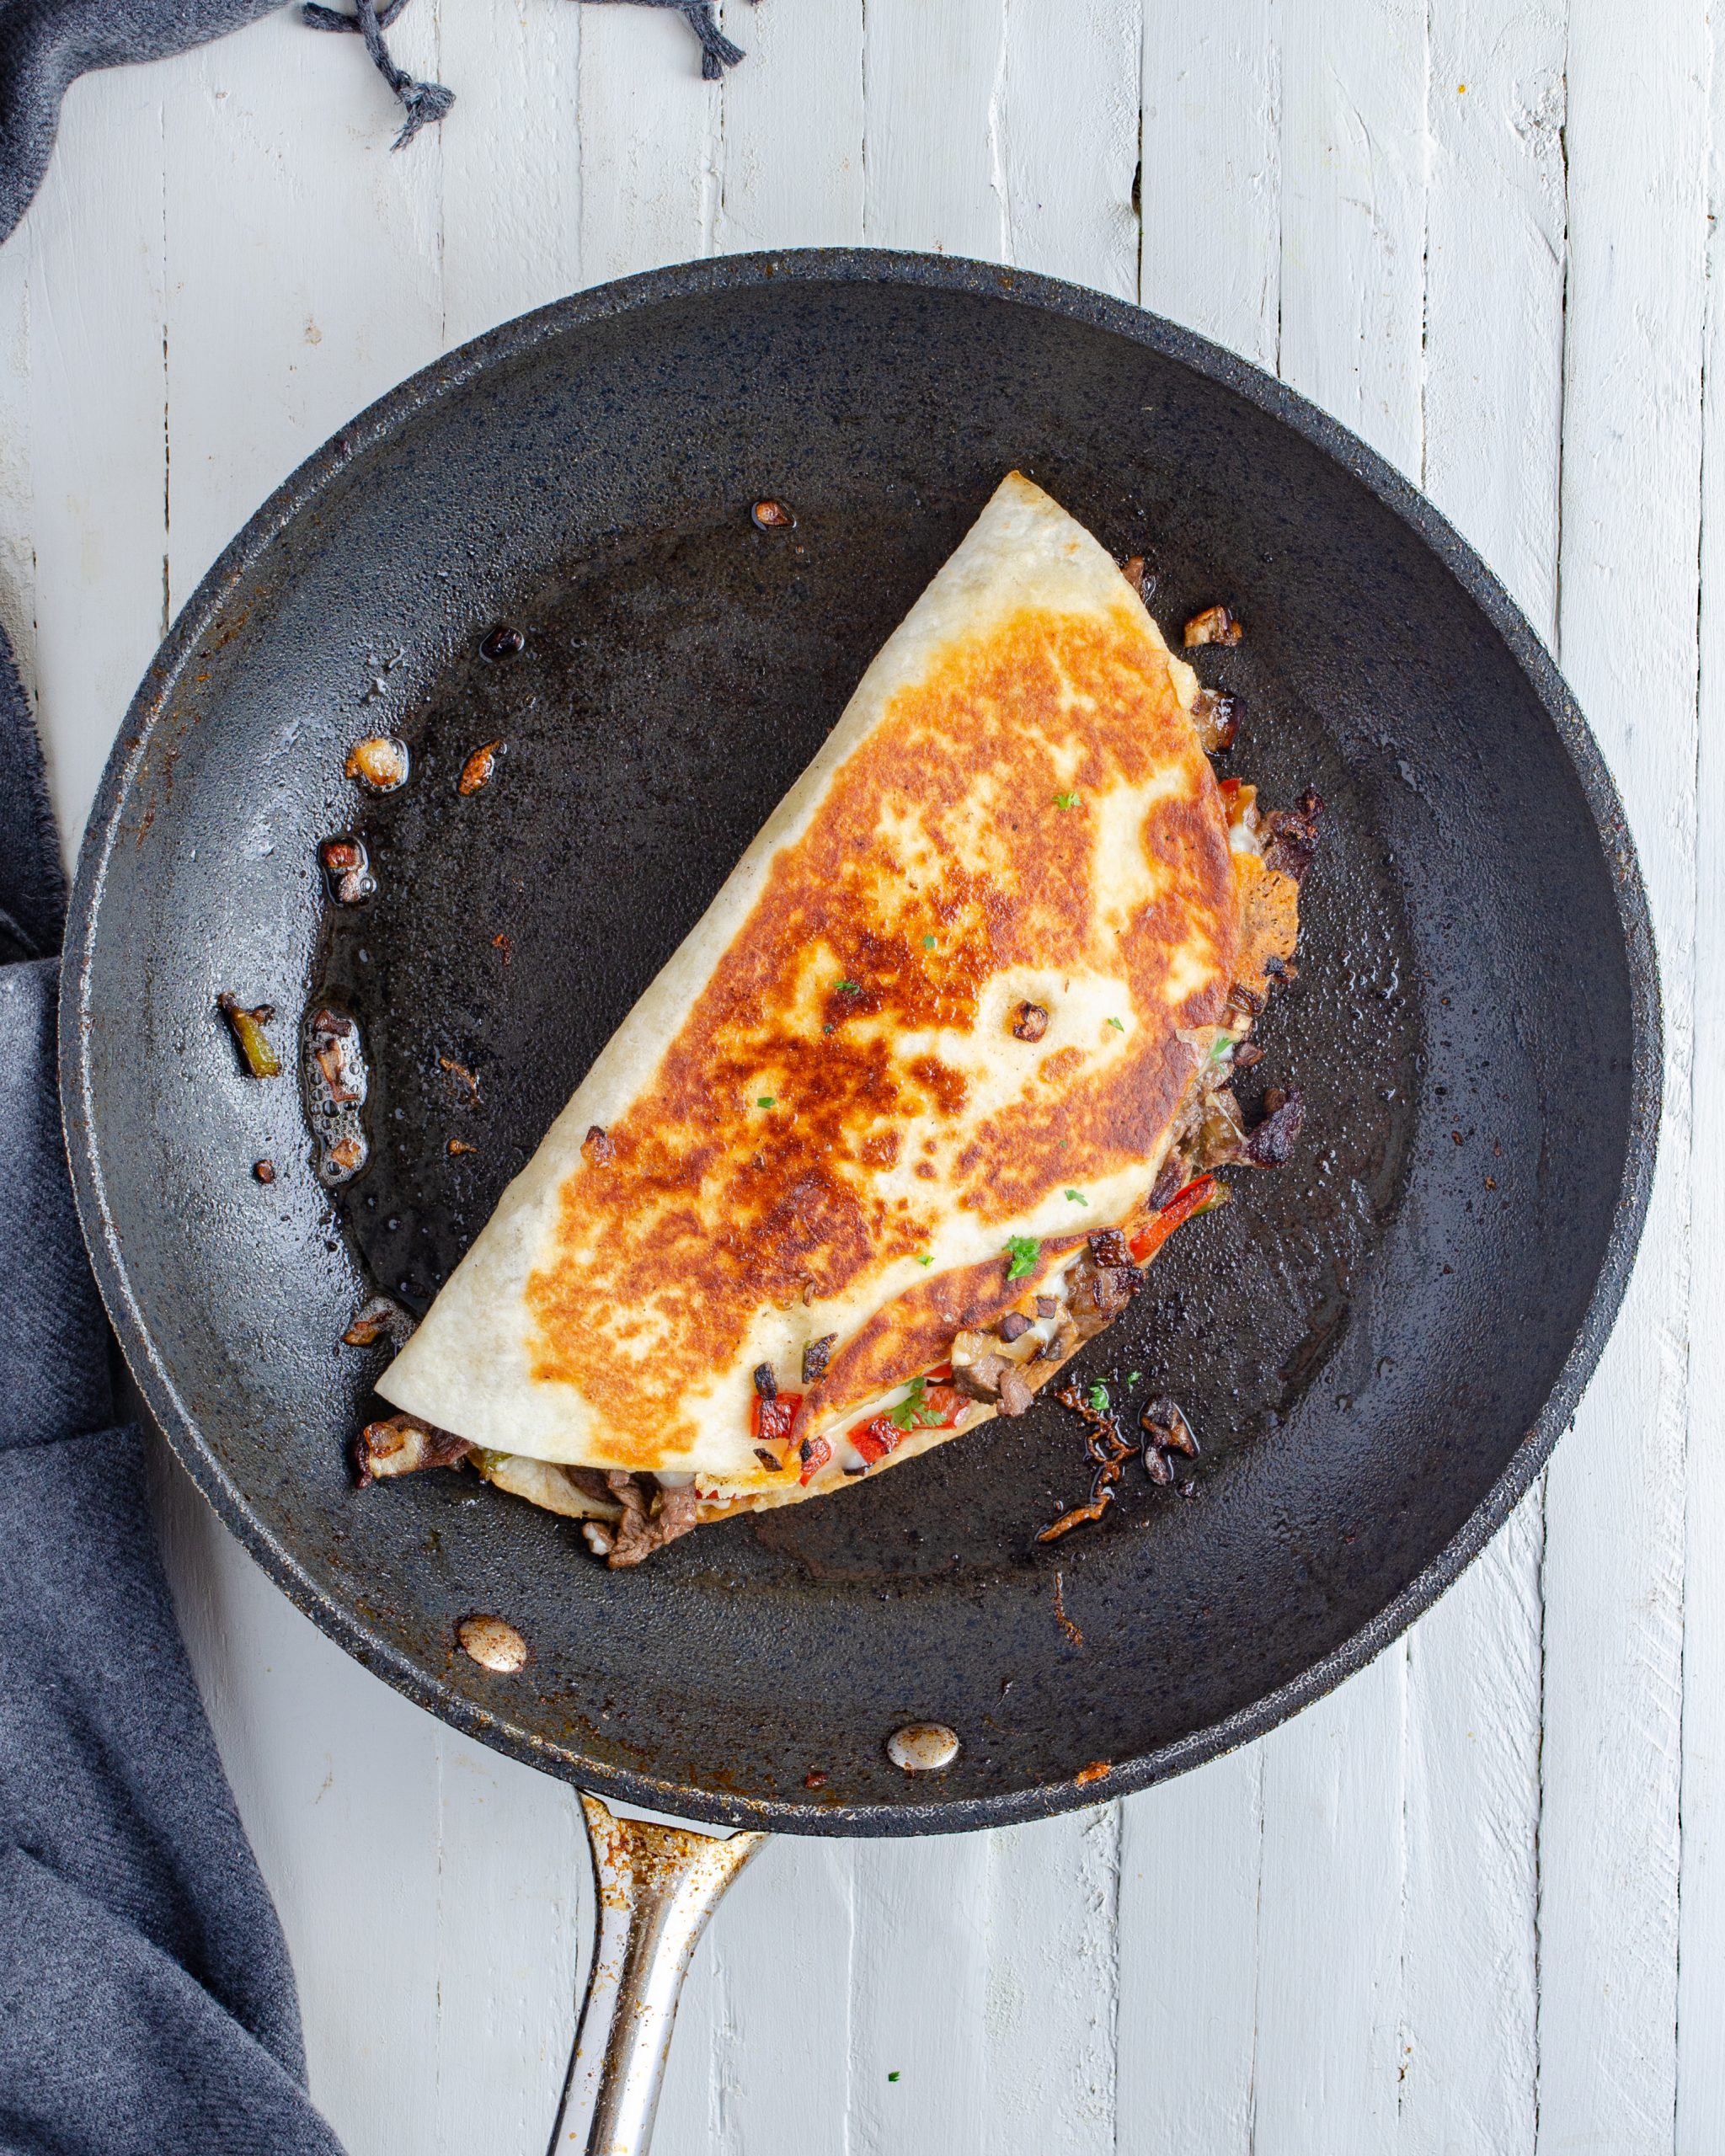 Add a tsp of olive oil to a skillet, and lightly brown the folded tortillas evenly on both sides until crispy and until the cheese has melted. 